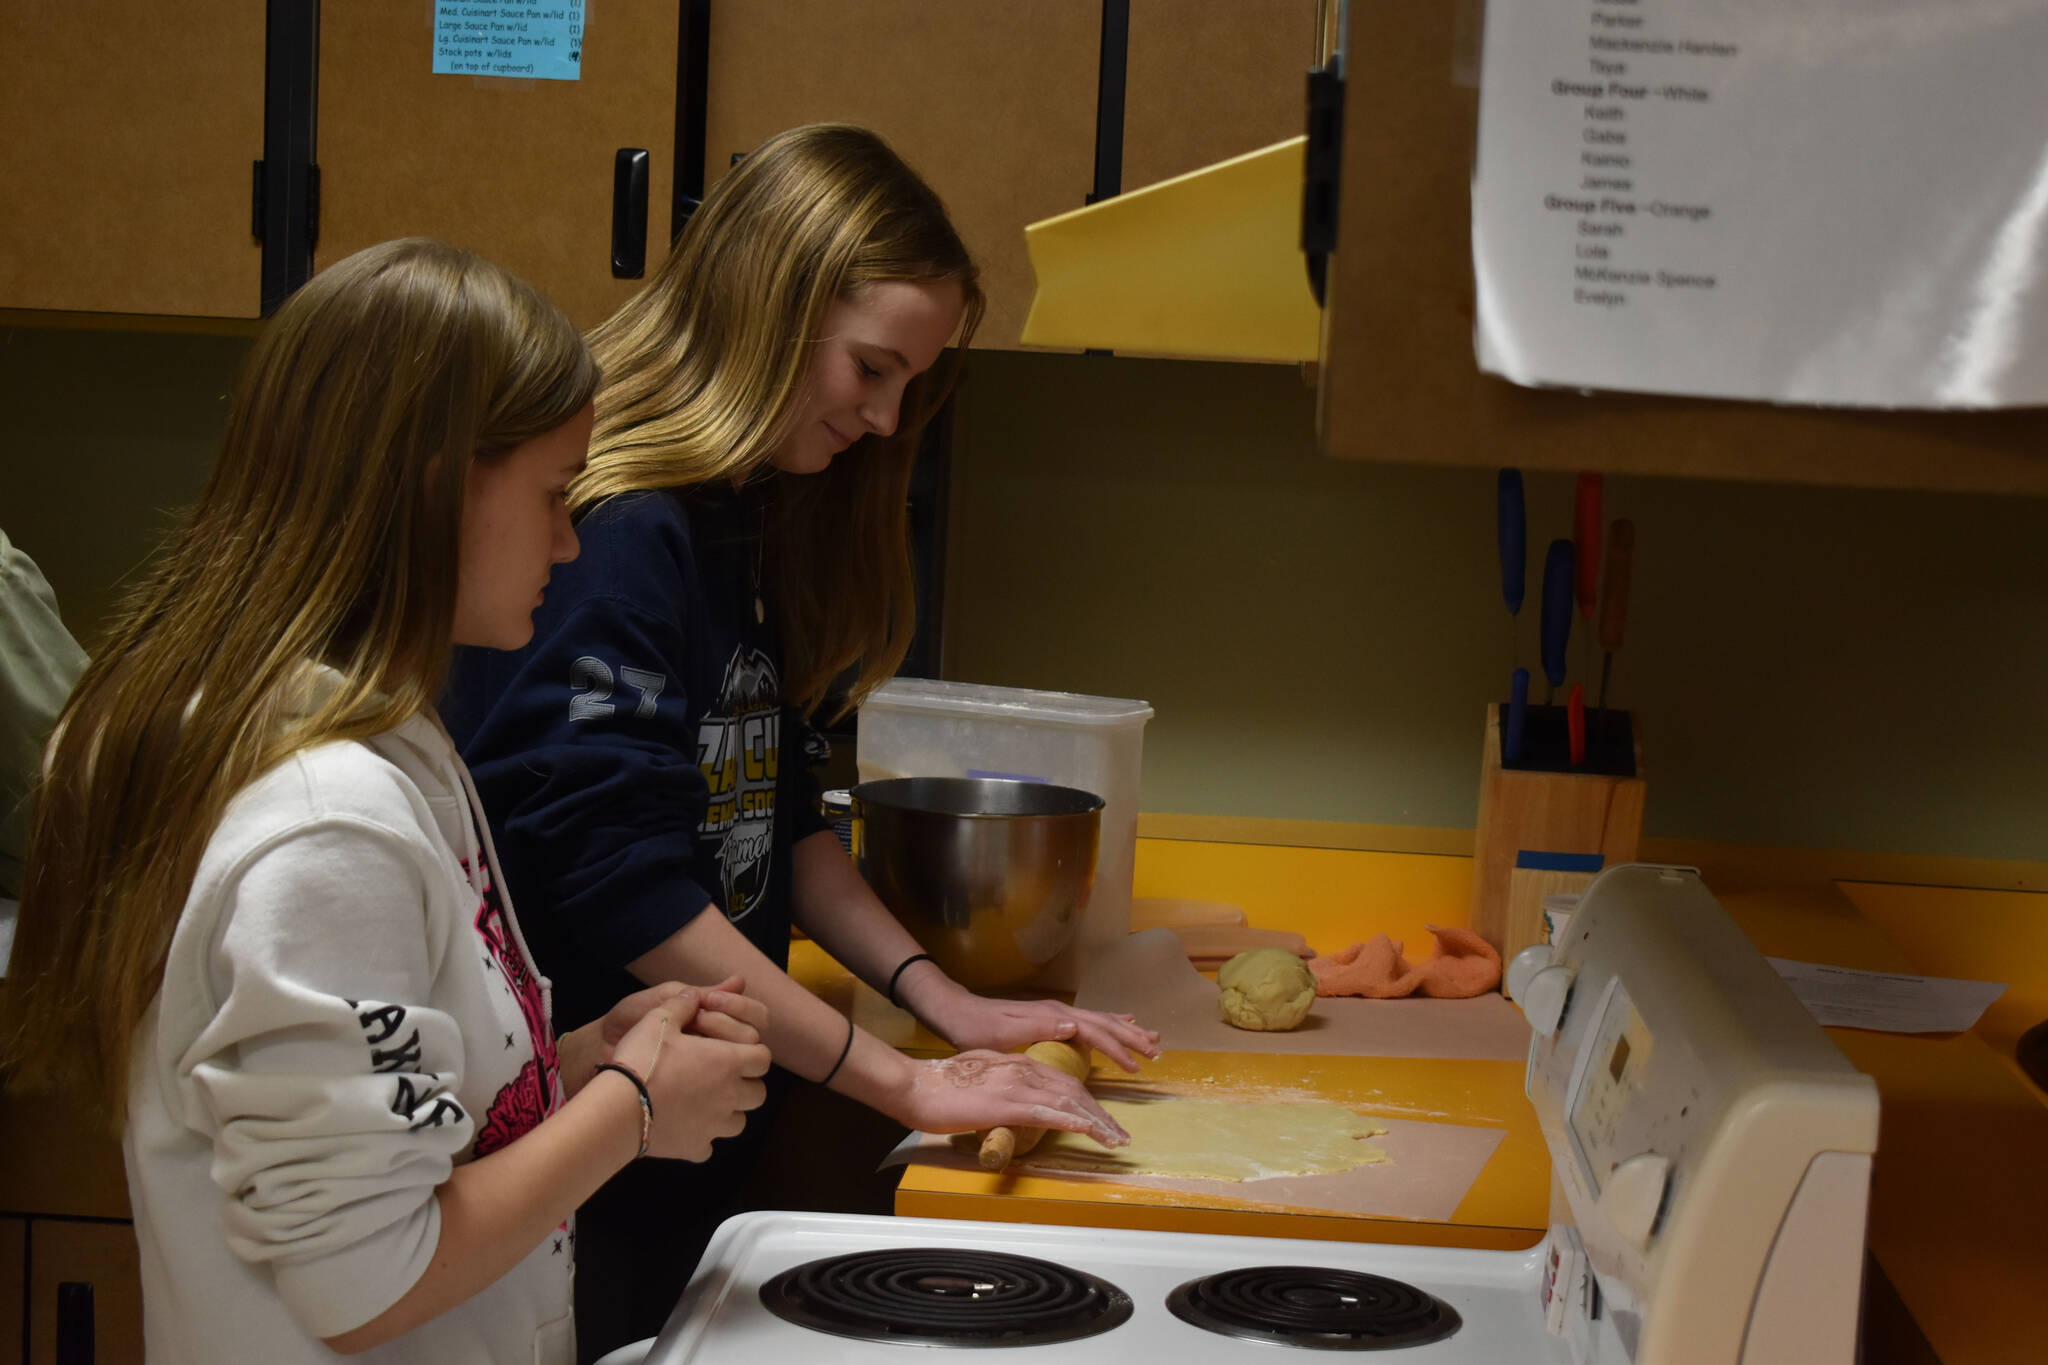 Kenai Central High School Culinary Students roll out dough for Christmas cookies as part of bake sale preparation on Tuesday, Nov. 29, 2022, at Kenai Central High School in Kenai, Alaska. (Jake Dye/Peninsula Clarion)